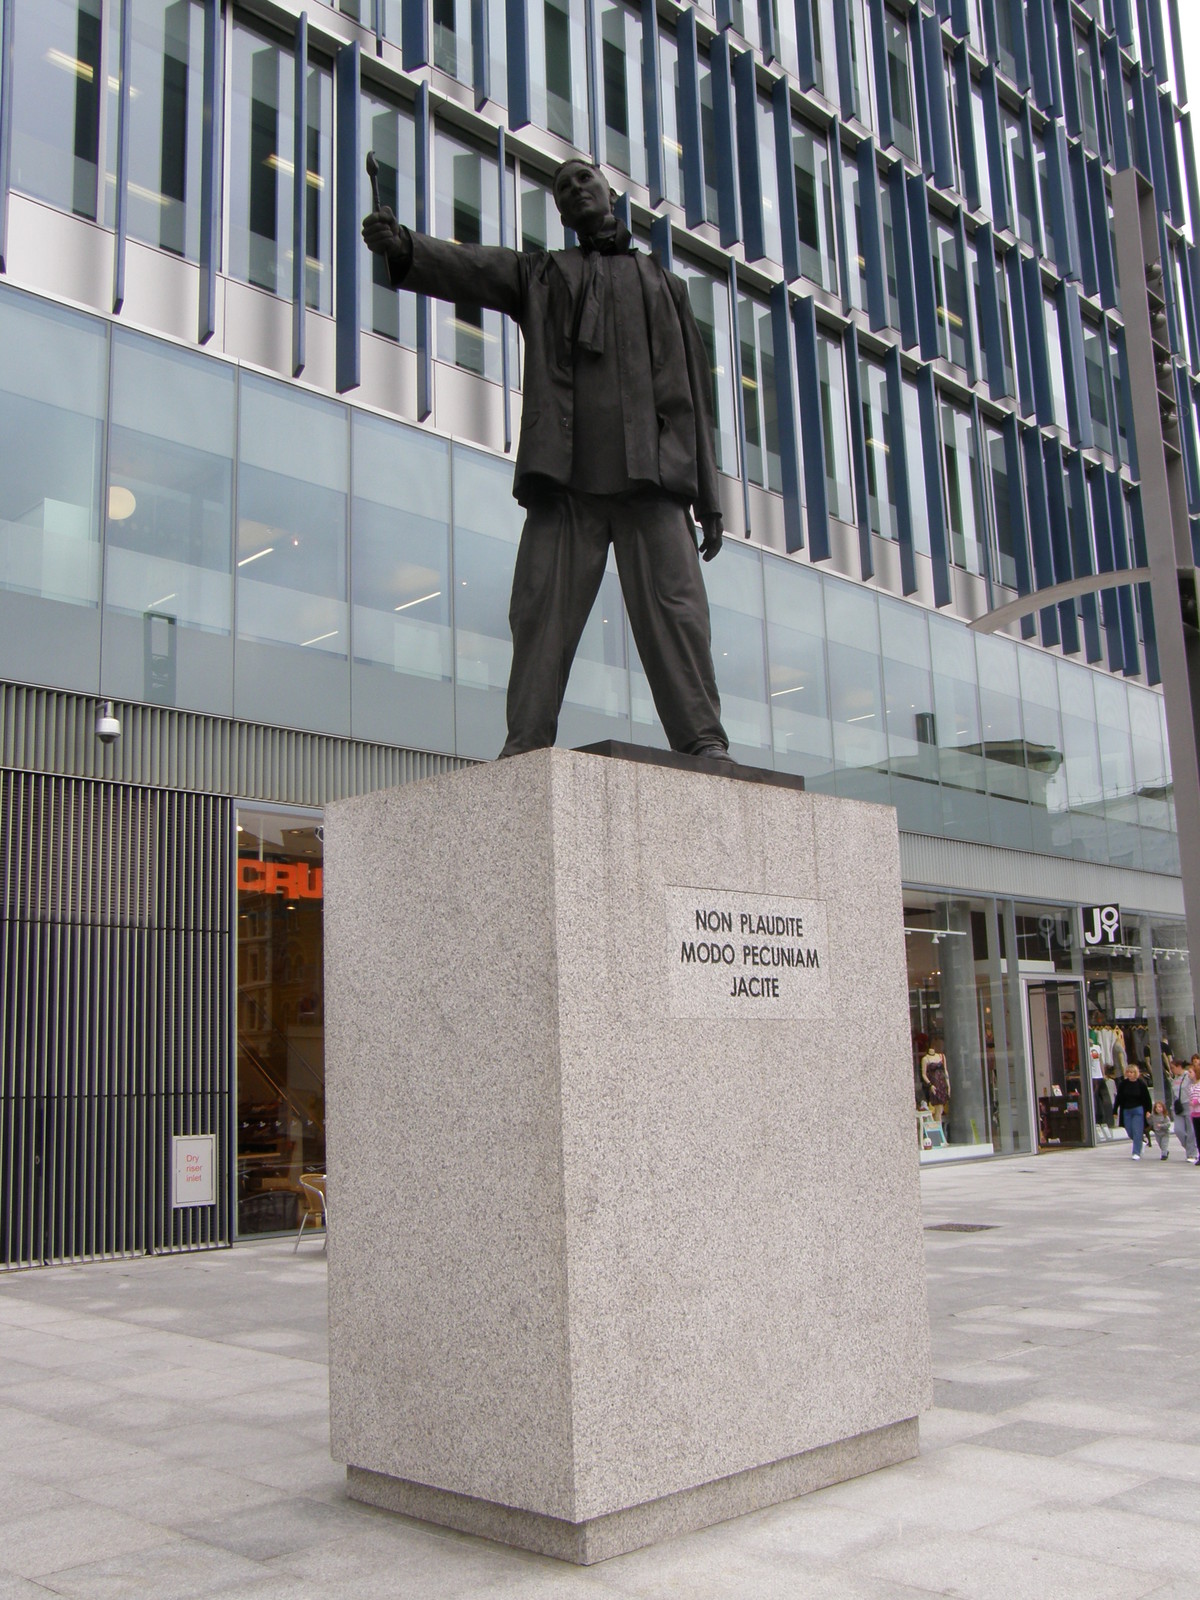 The statue outside the Blue Fin Building: 'Don't applaud, just throw money'